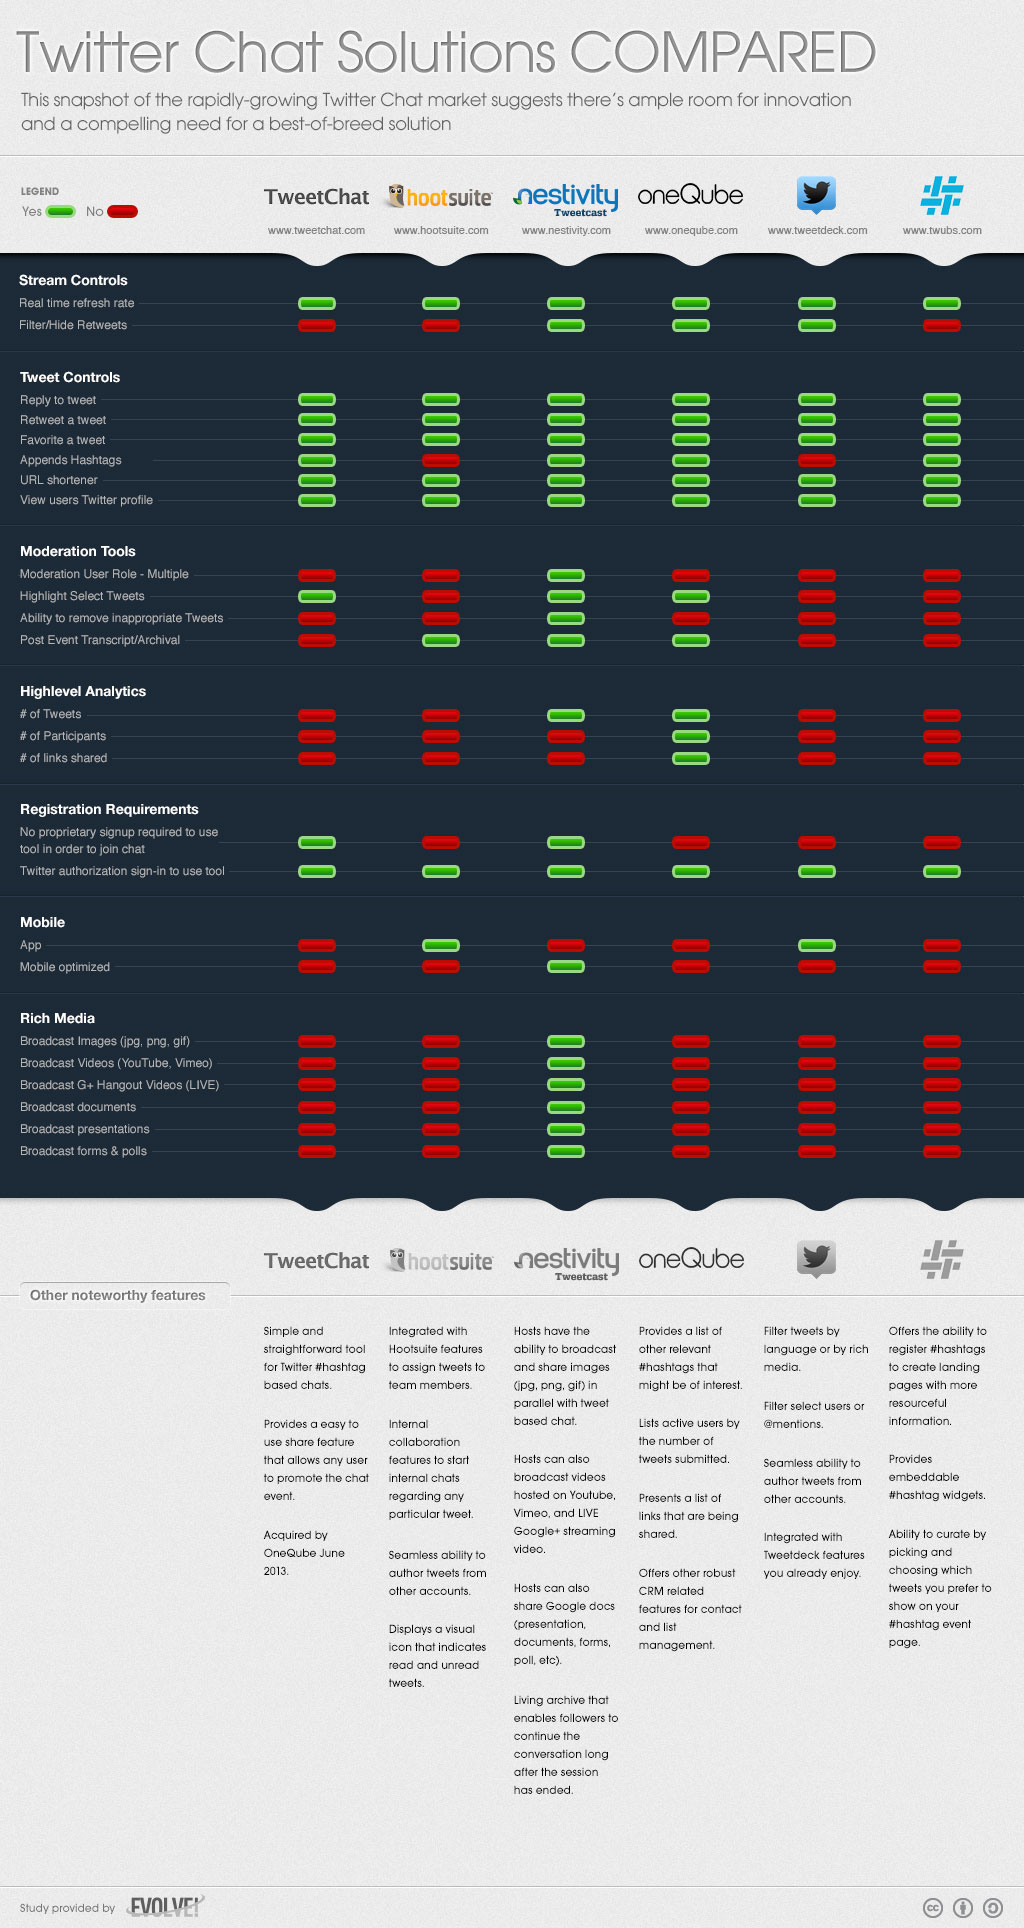 twitter-chat-options-compared-infographic